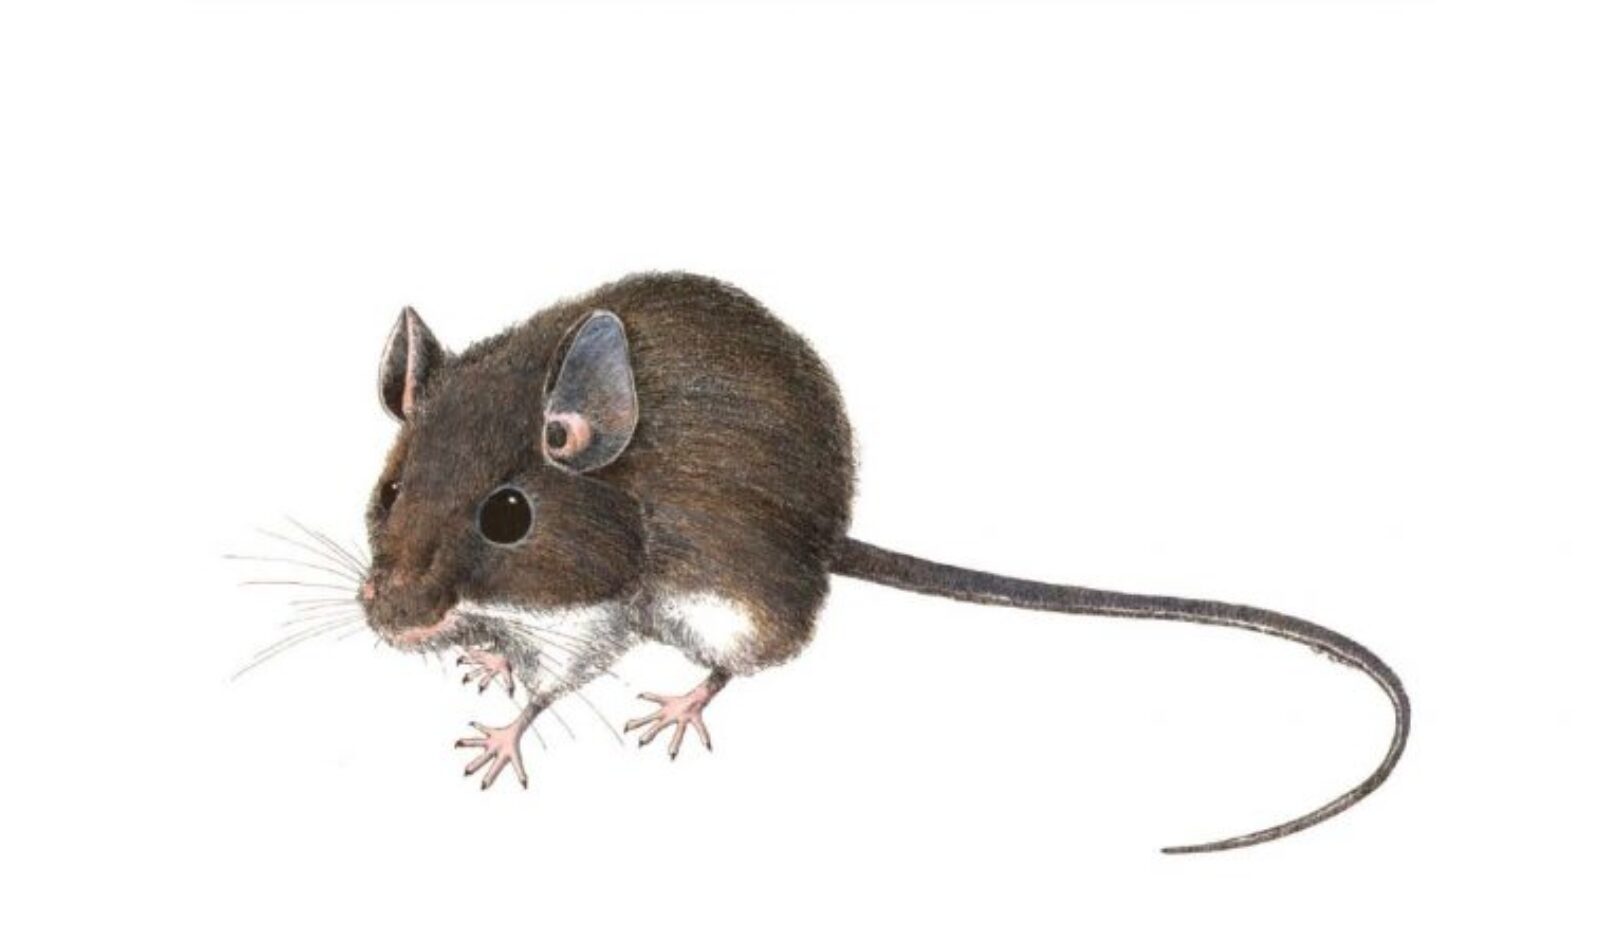 A Hantavirus Exposure Control Program for Employers and Workers